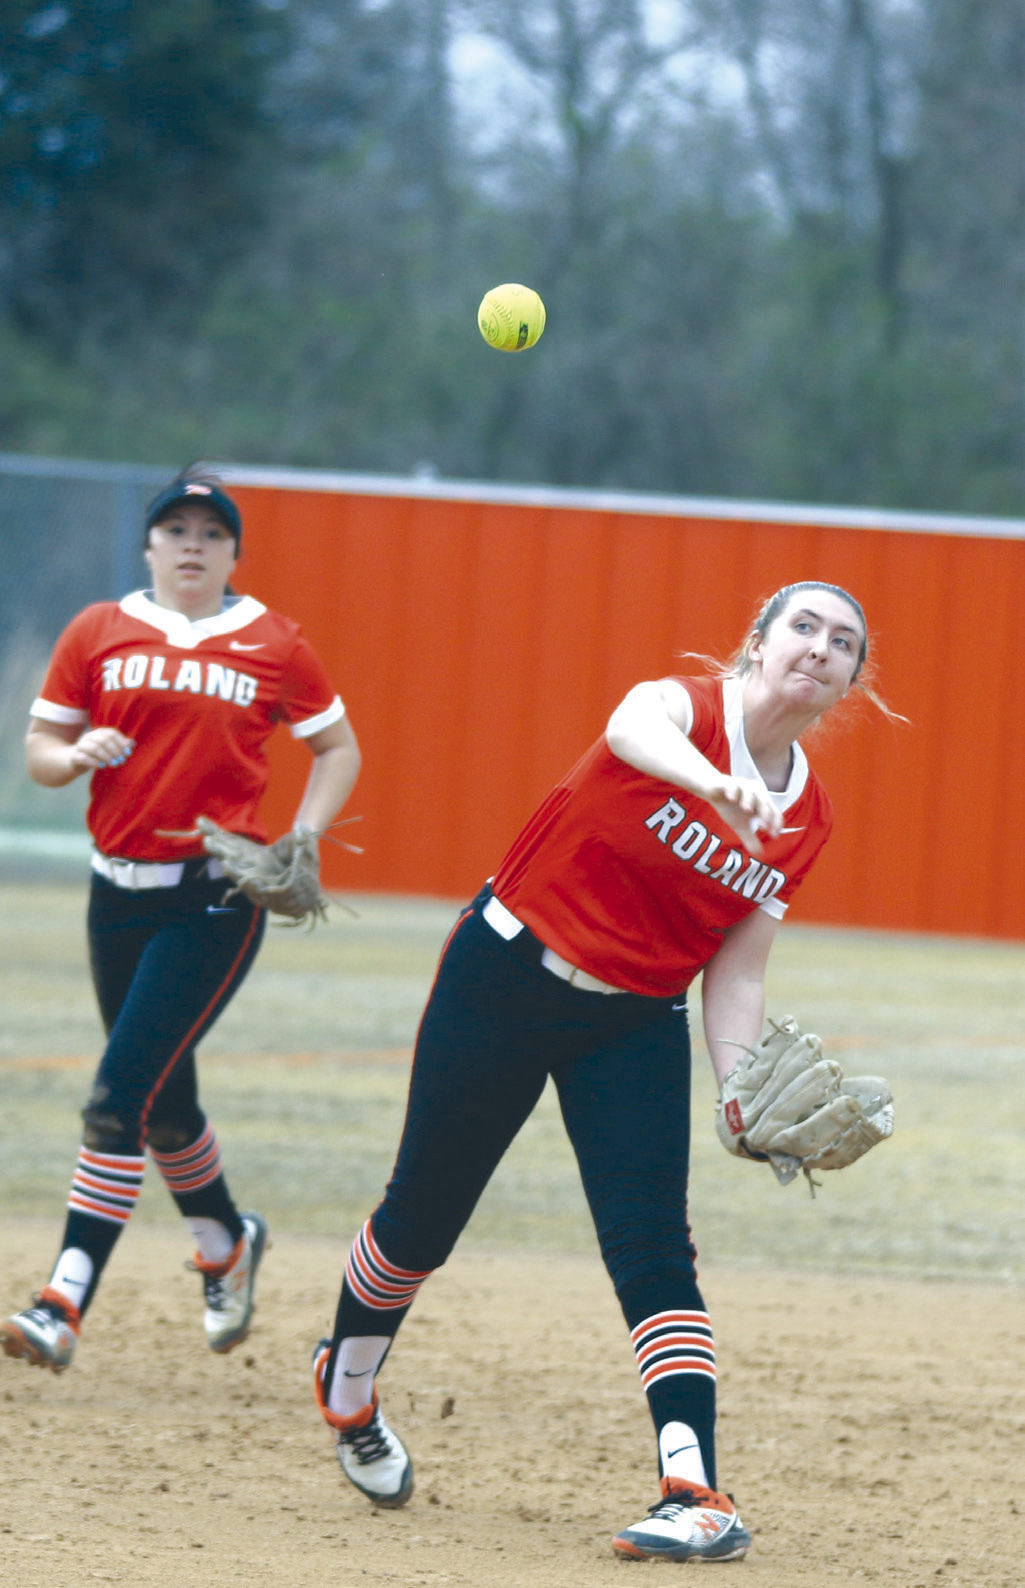 Roland third baseman Madi Mulanax throws to first base as shortstop Addyson Clark looks on during Thursday’s 11-4 win over Sallisaw in the Lady Rangers’ first game of the Webbers Falls/Sallisaw Slowpitch Tournament at Sallisaw. LEA LESSLEY •TIMES